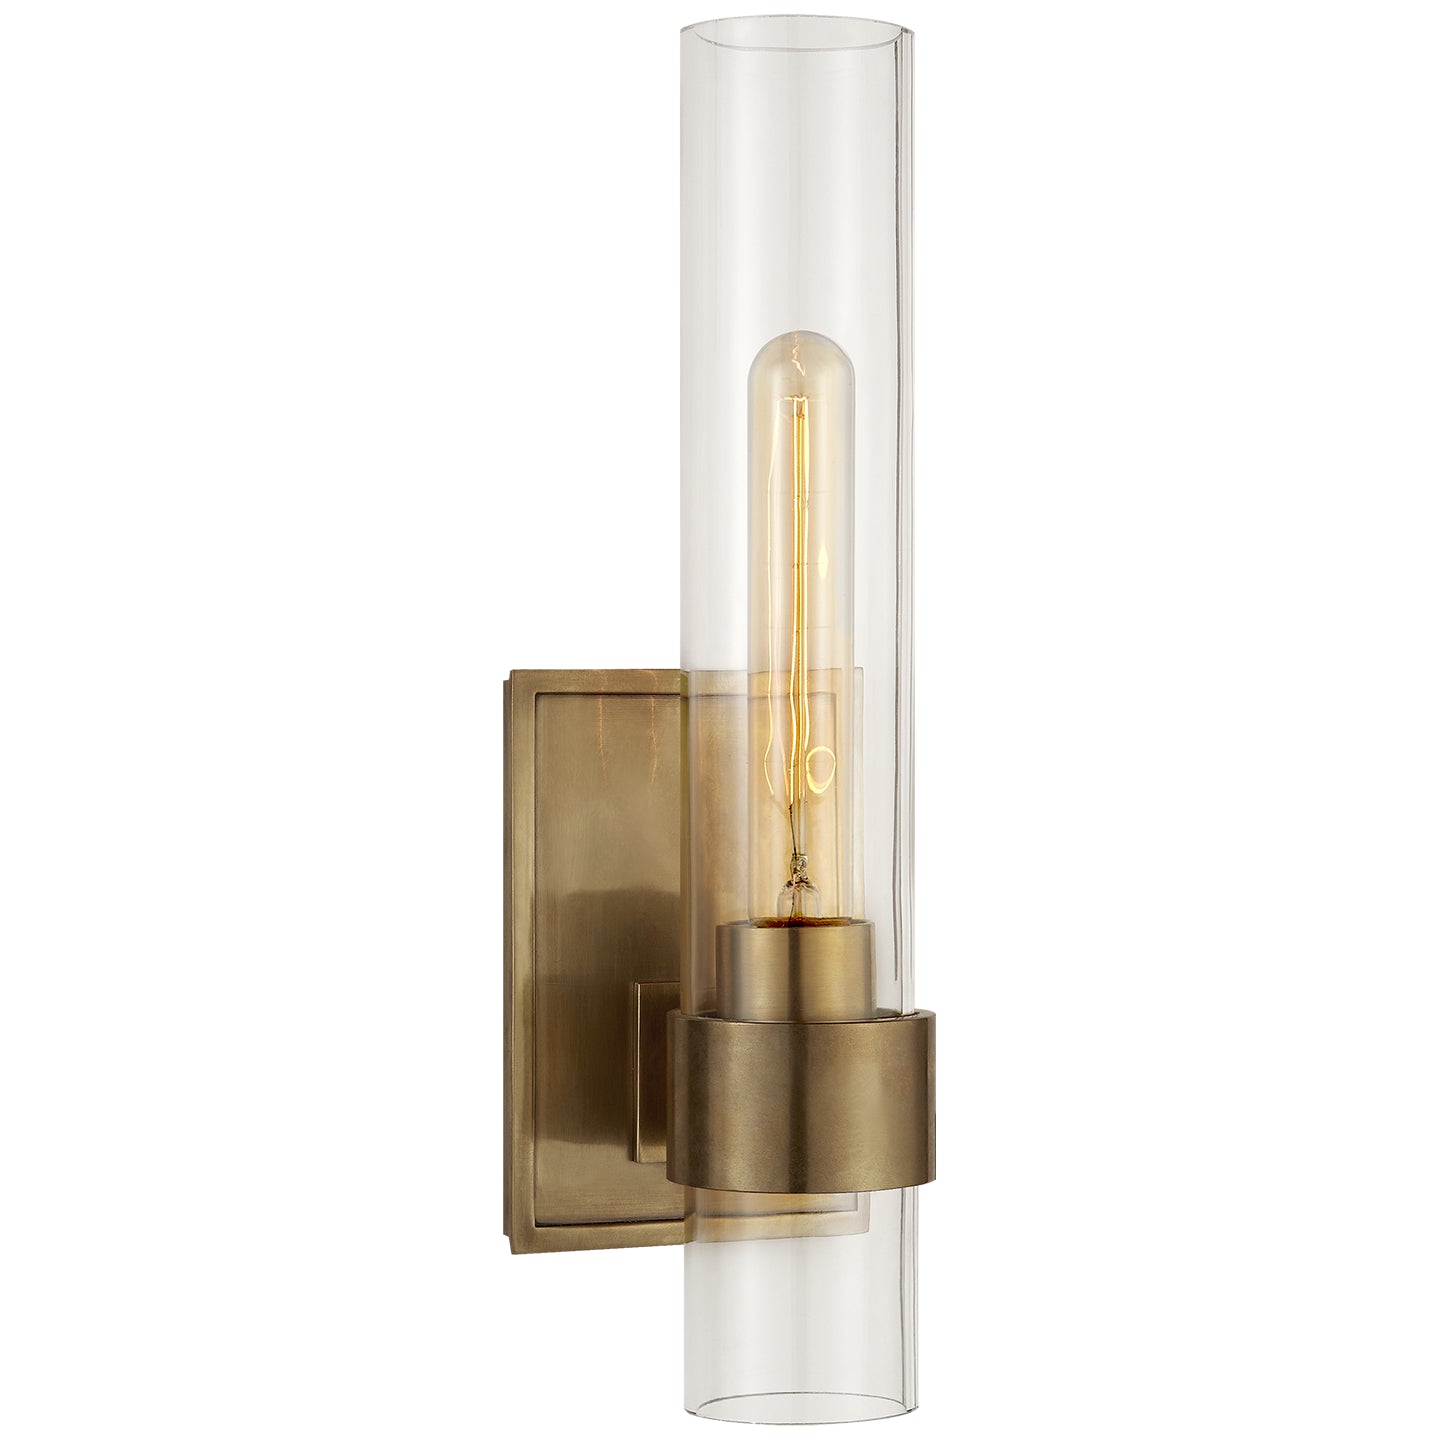 Visual Comfort Signature - S 2165HAB-CG - One Light Wall Sconce - Presidio - Hand-Rubbed Antique Brass